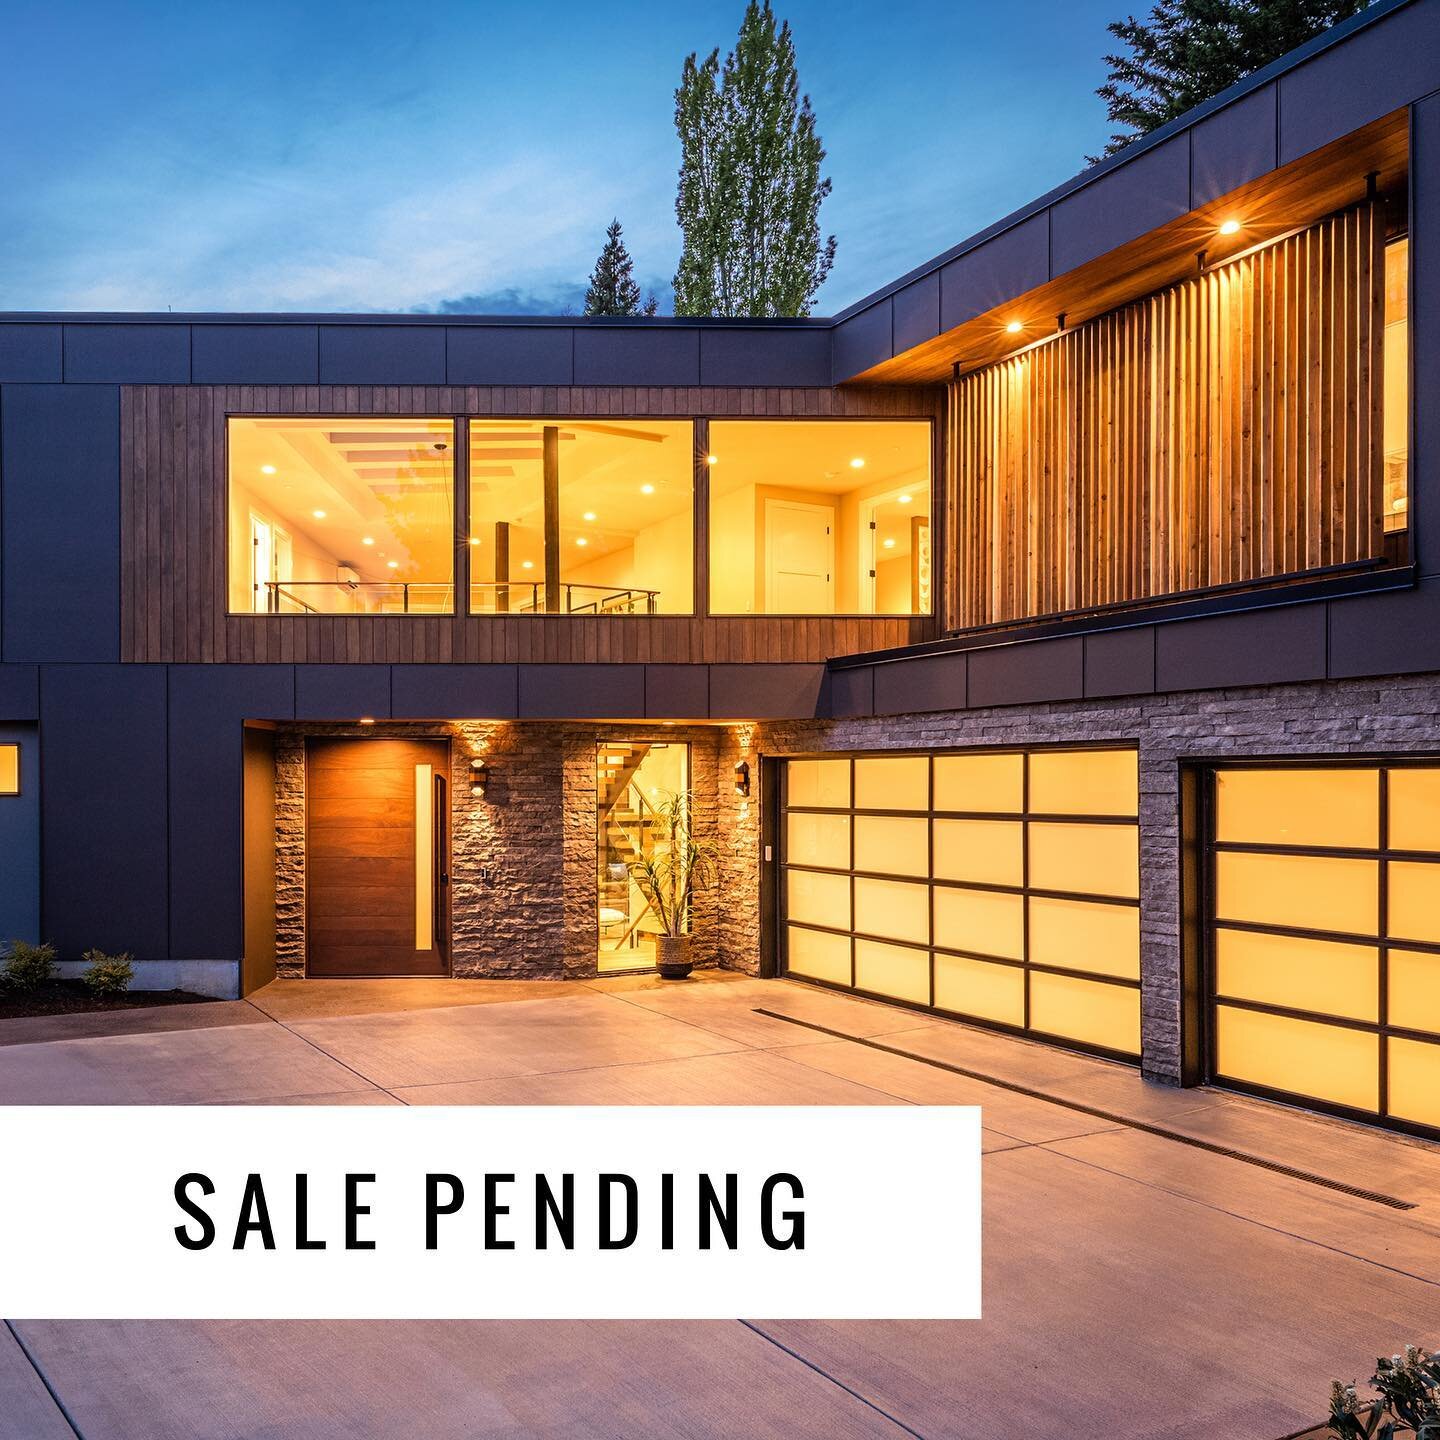 Thanks to everyone who came to tour Oak &amp; Iron House in the past 5 days. The house is now pending. We are looking forward to bring you more great houses in the near future. #salepending #realeastate #oakandironhouse #medina #seattle #modernhomes 